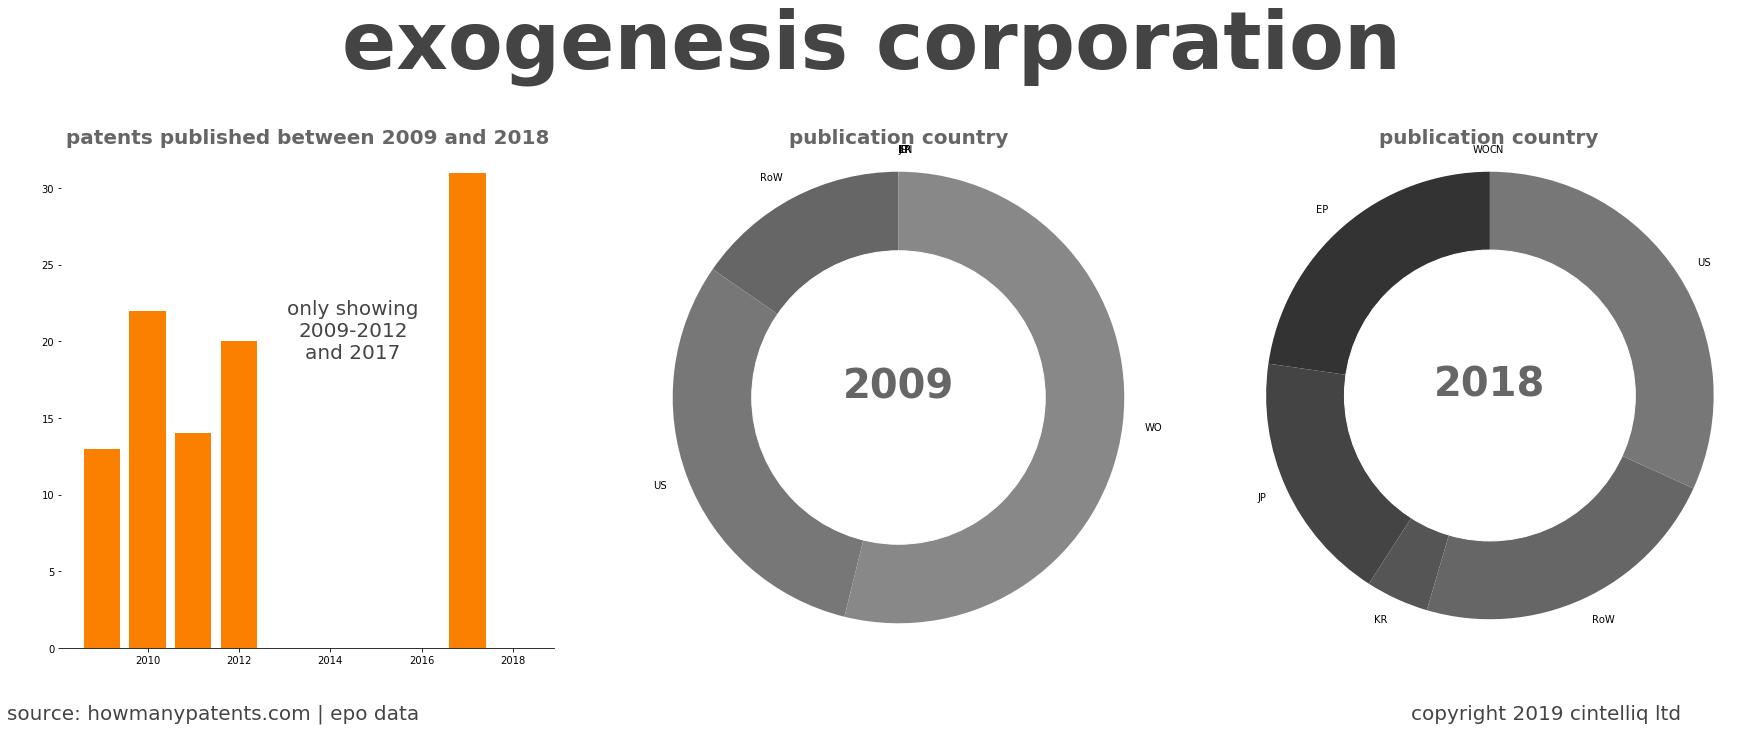 summary of patents for Exogenesis Corporation